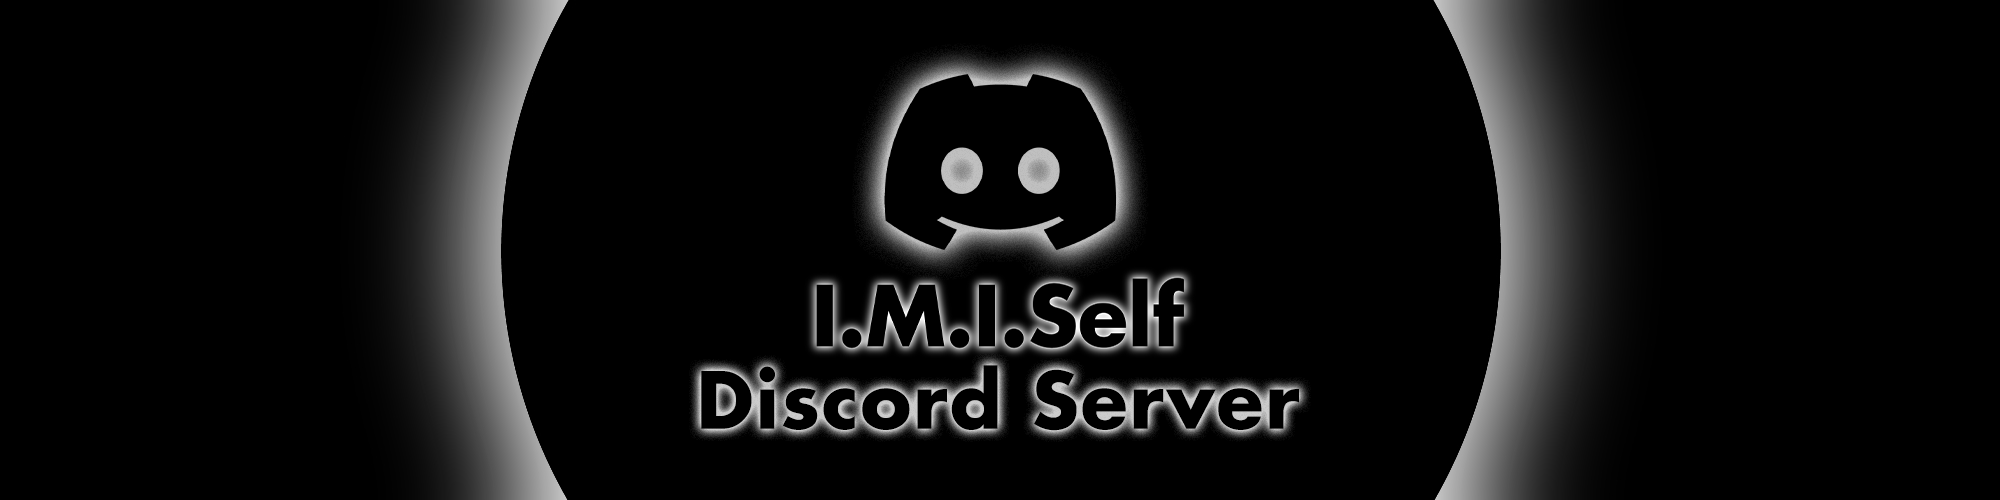 reminder: we have a discord